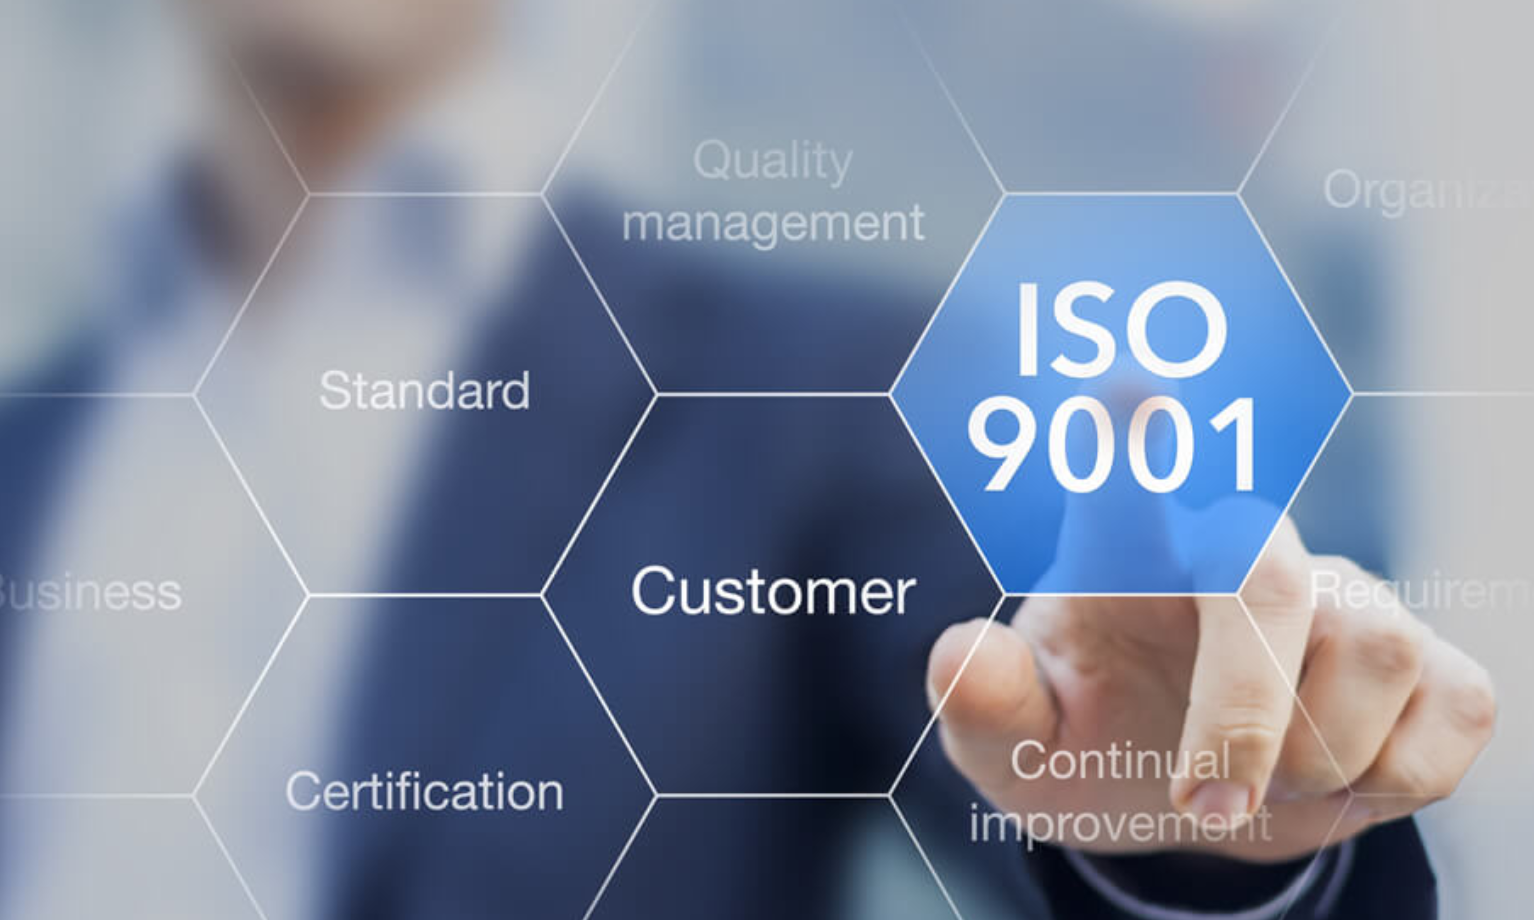 Another major milestone - we’re proudly ISO 9001 certified